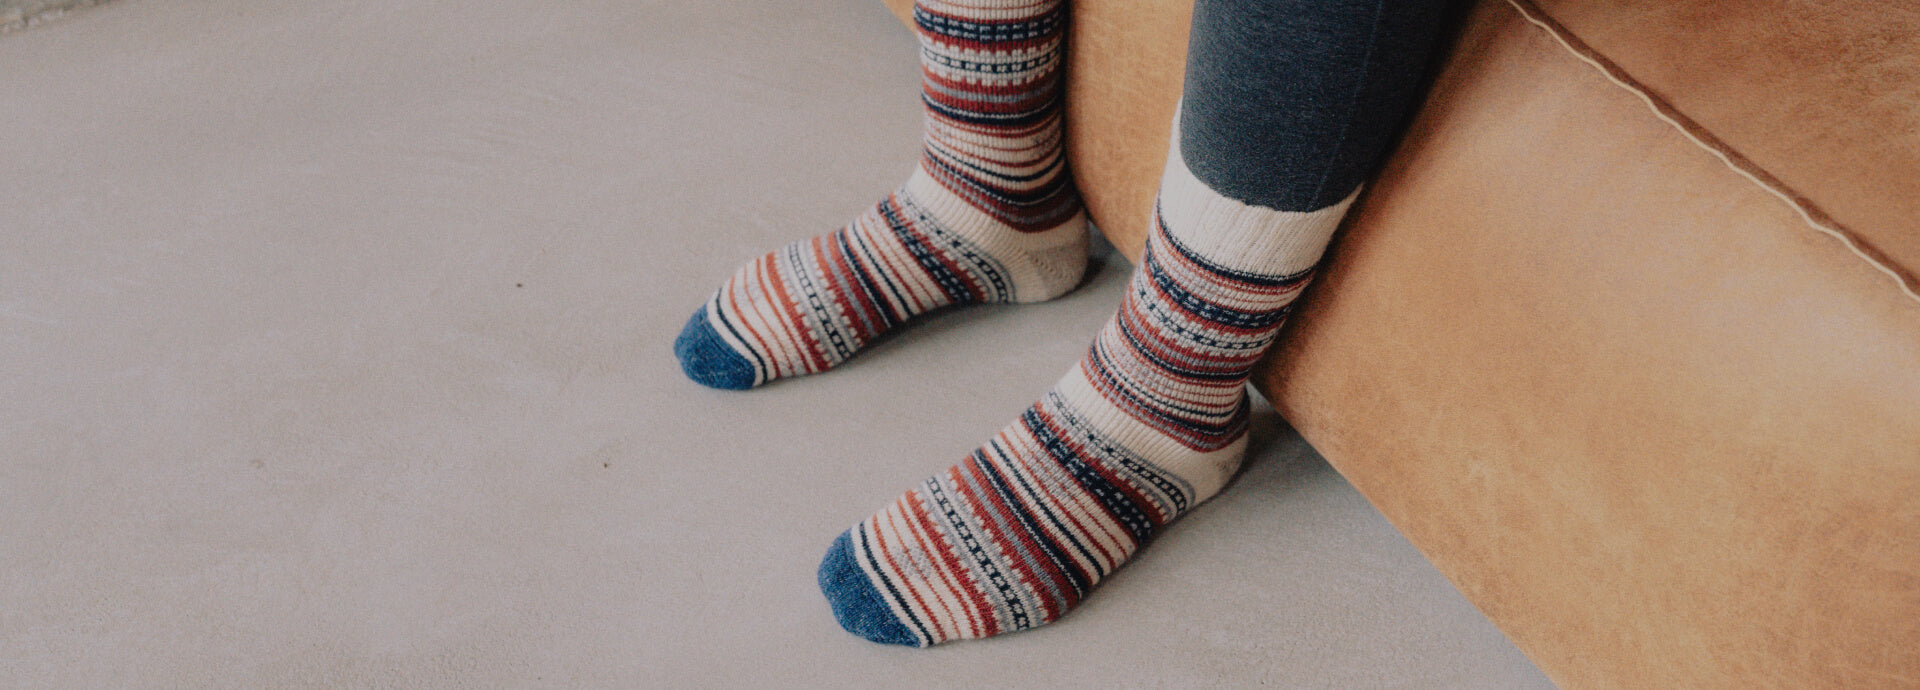 Home socks or slippers? Discover what’s best